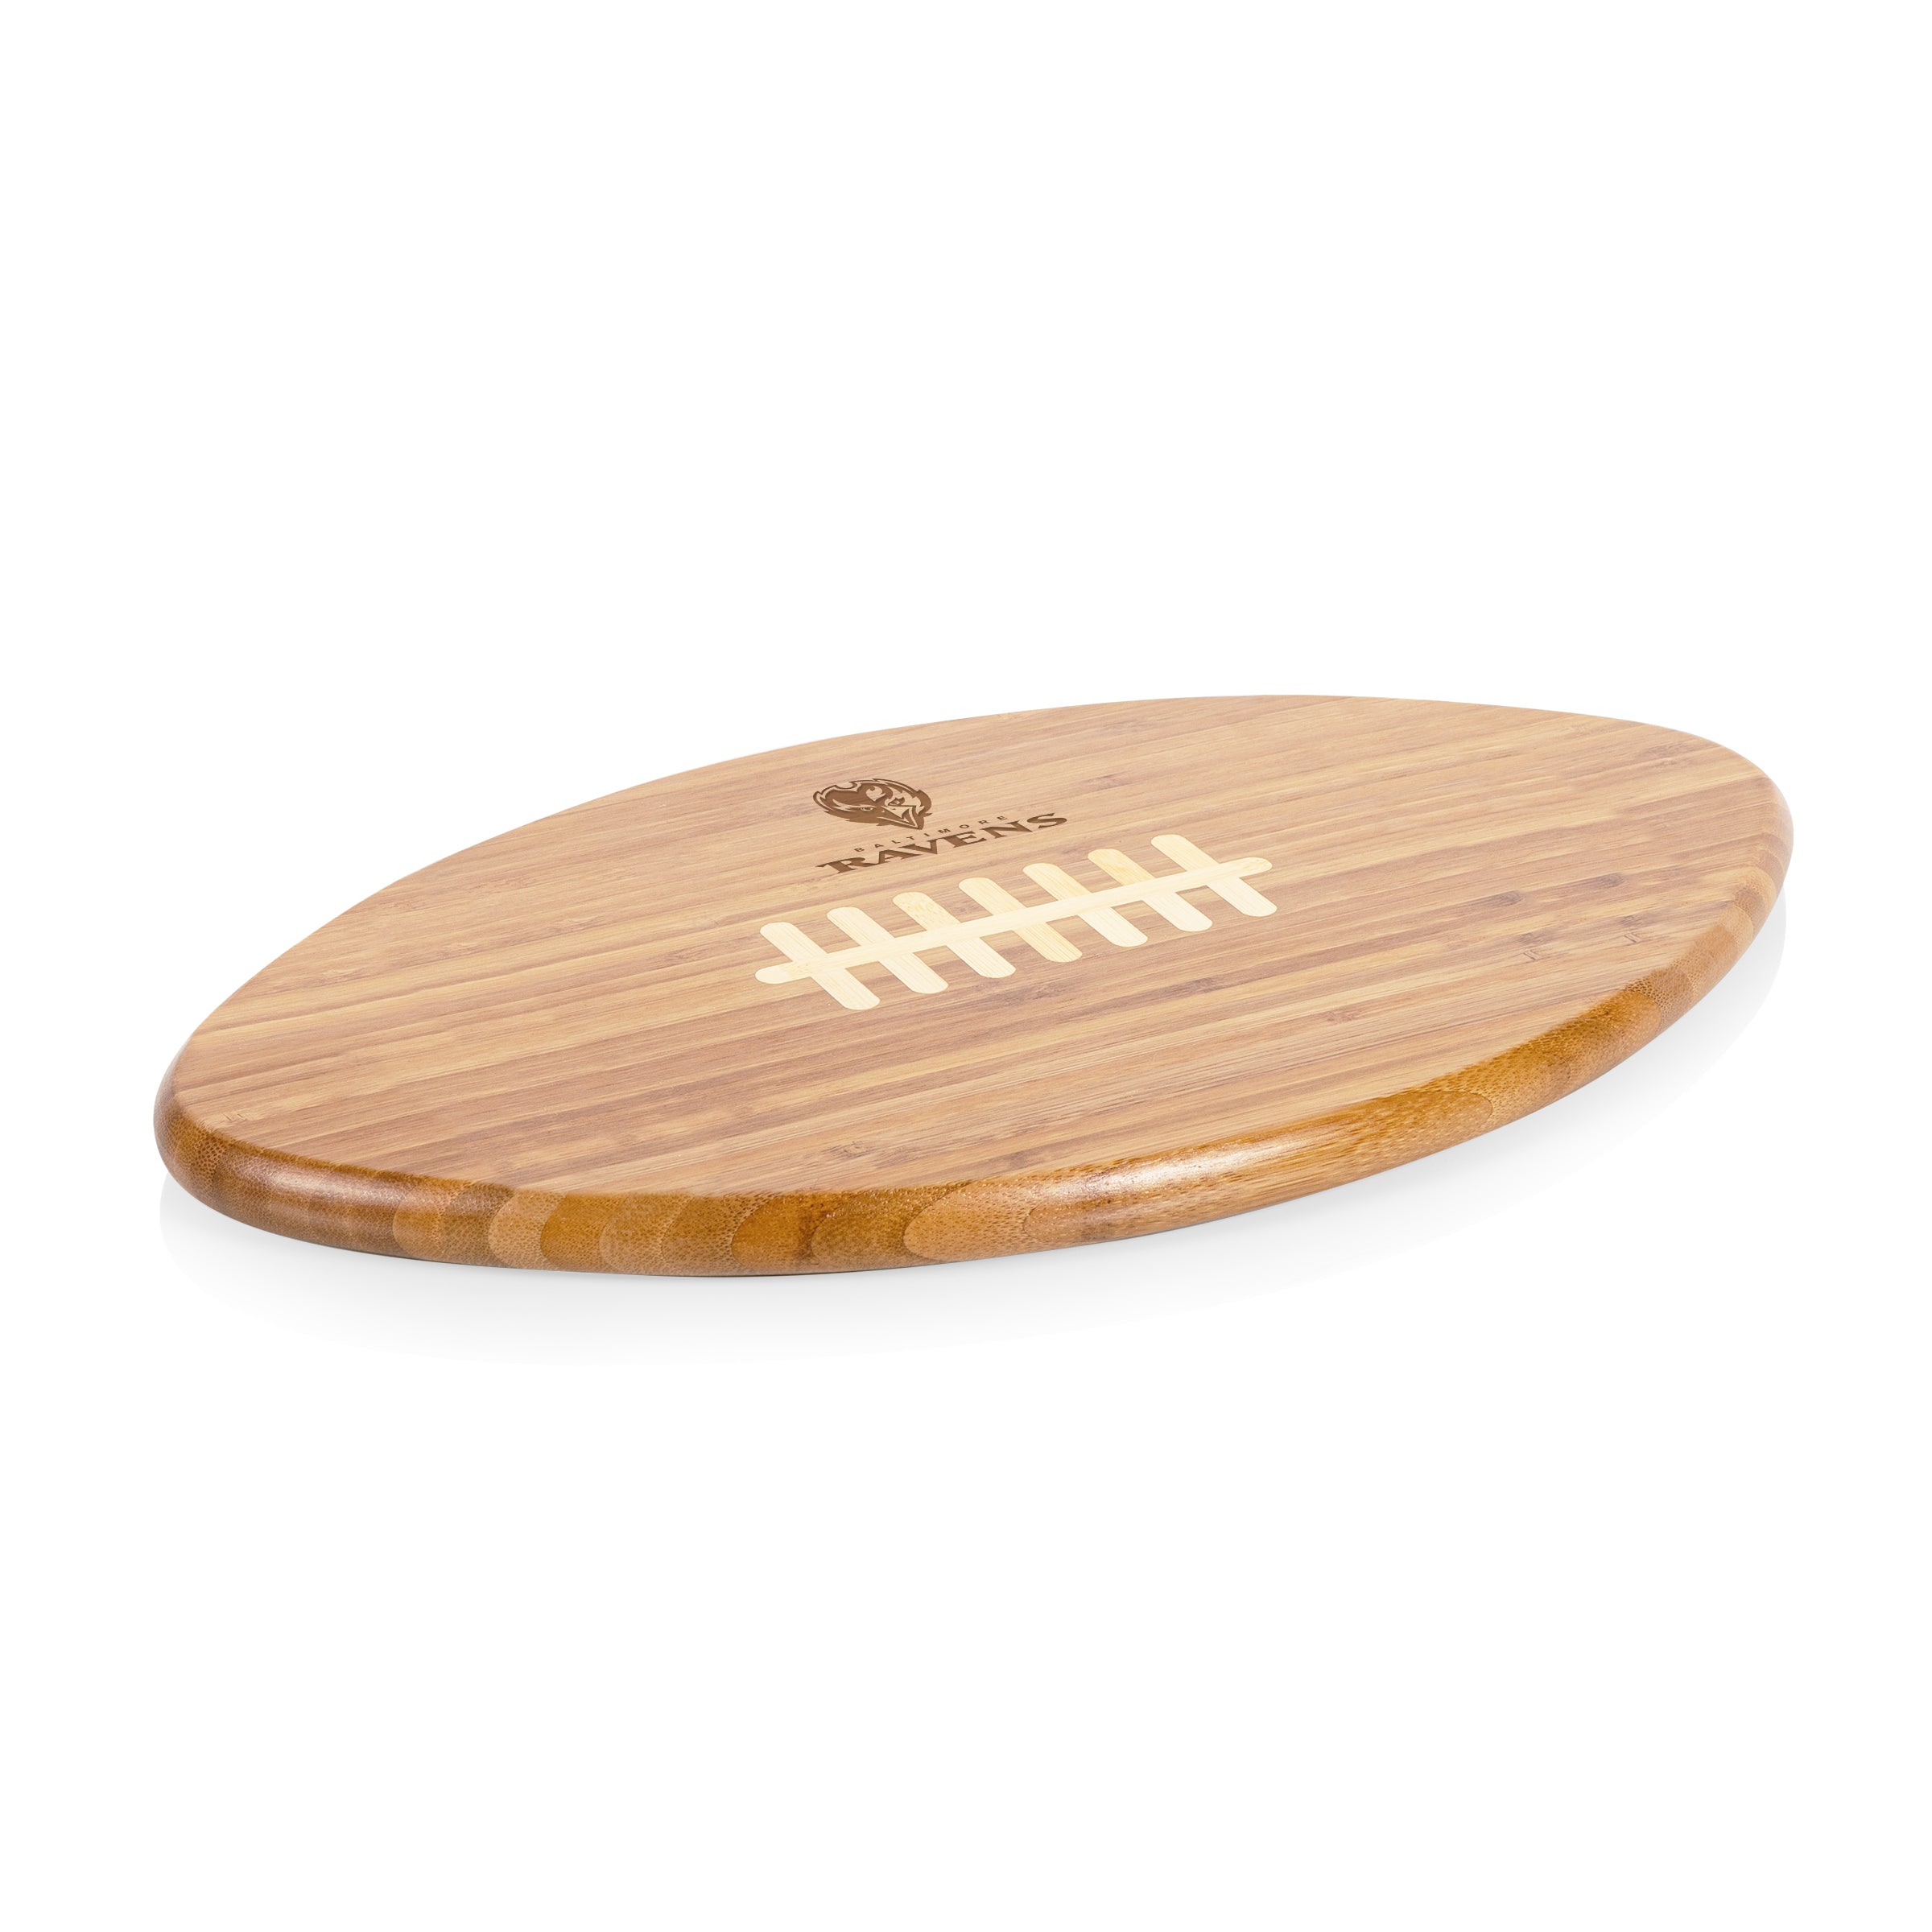 Baltimore Ravens - Touchdown! Football Cutting Board & Serving Tray